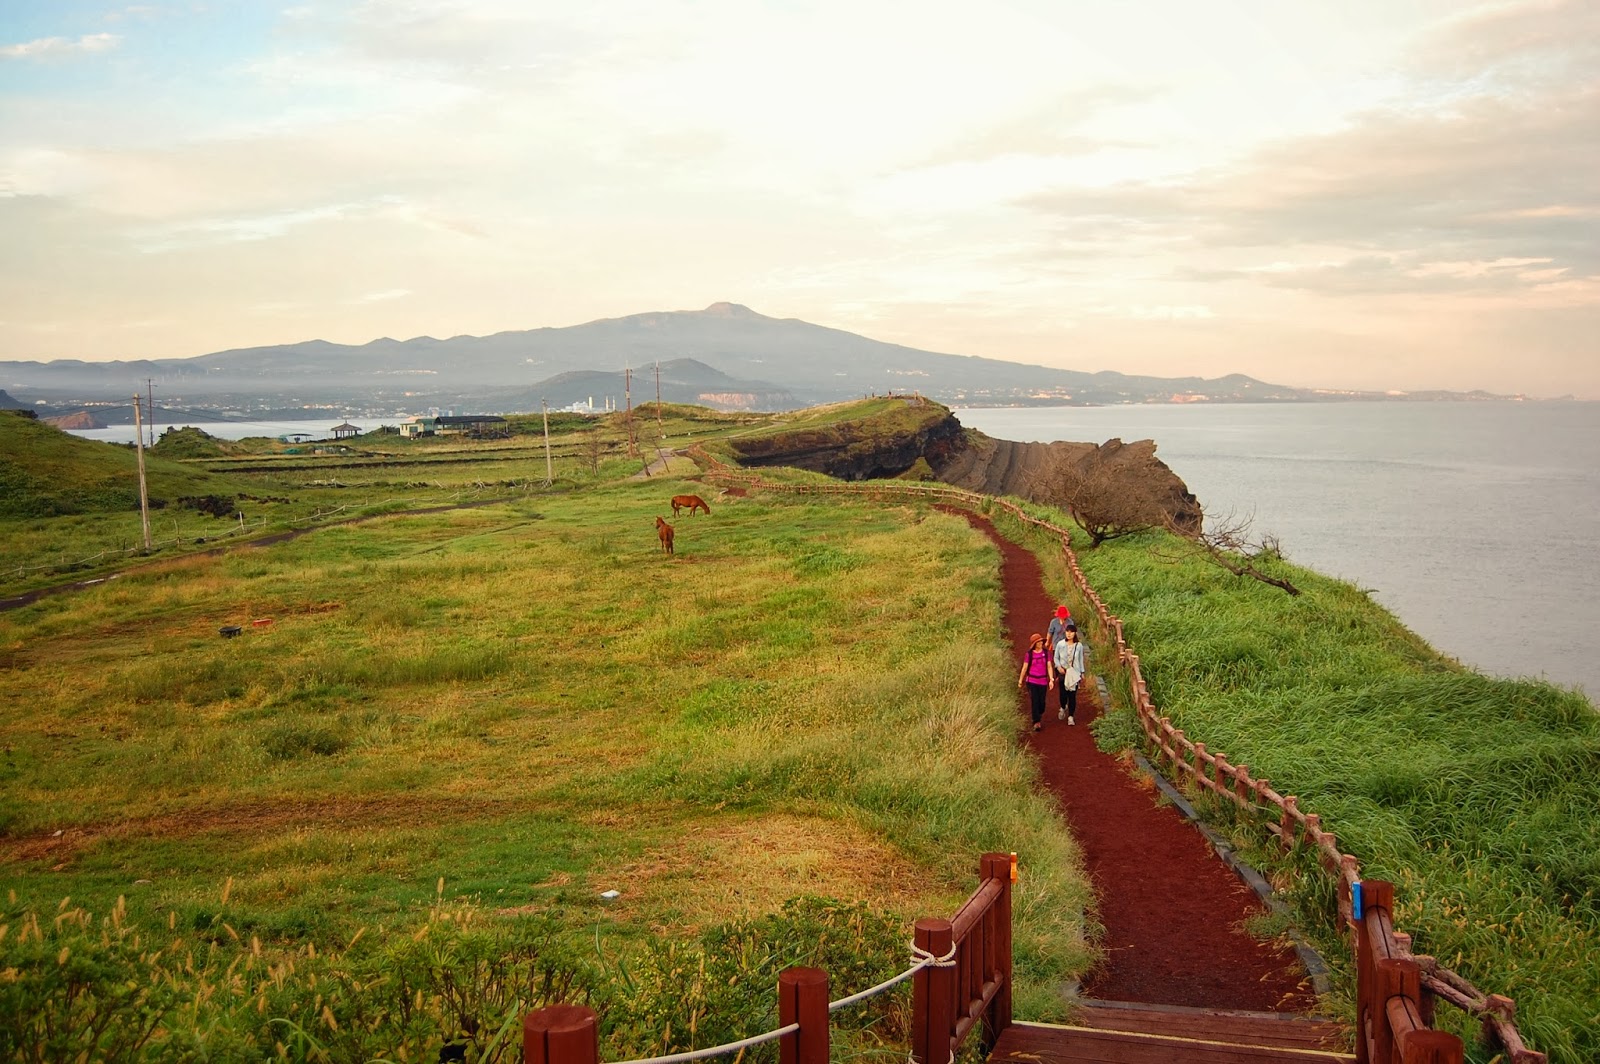 The trail leads you past some of Jeju's most beautiful sites. Pic: Sauteed Happy Family